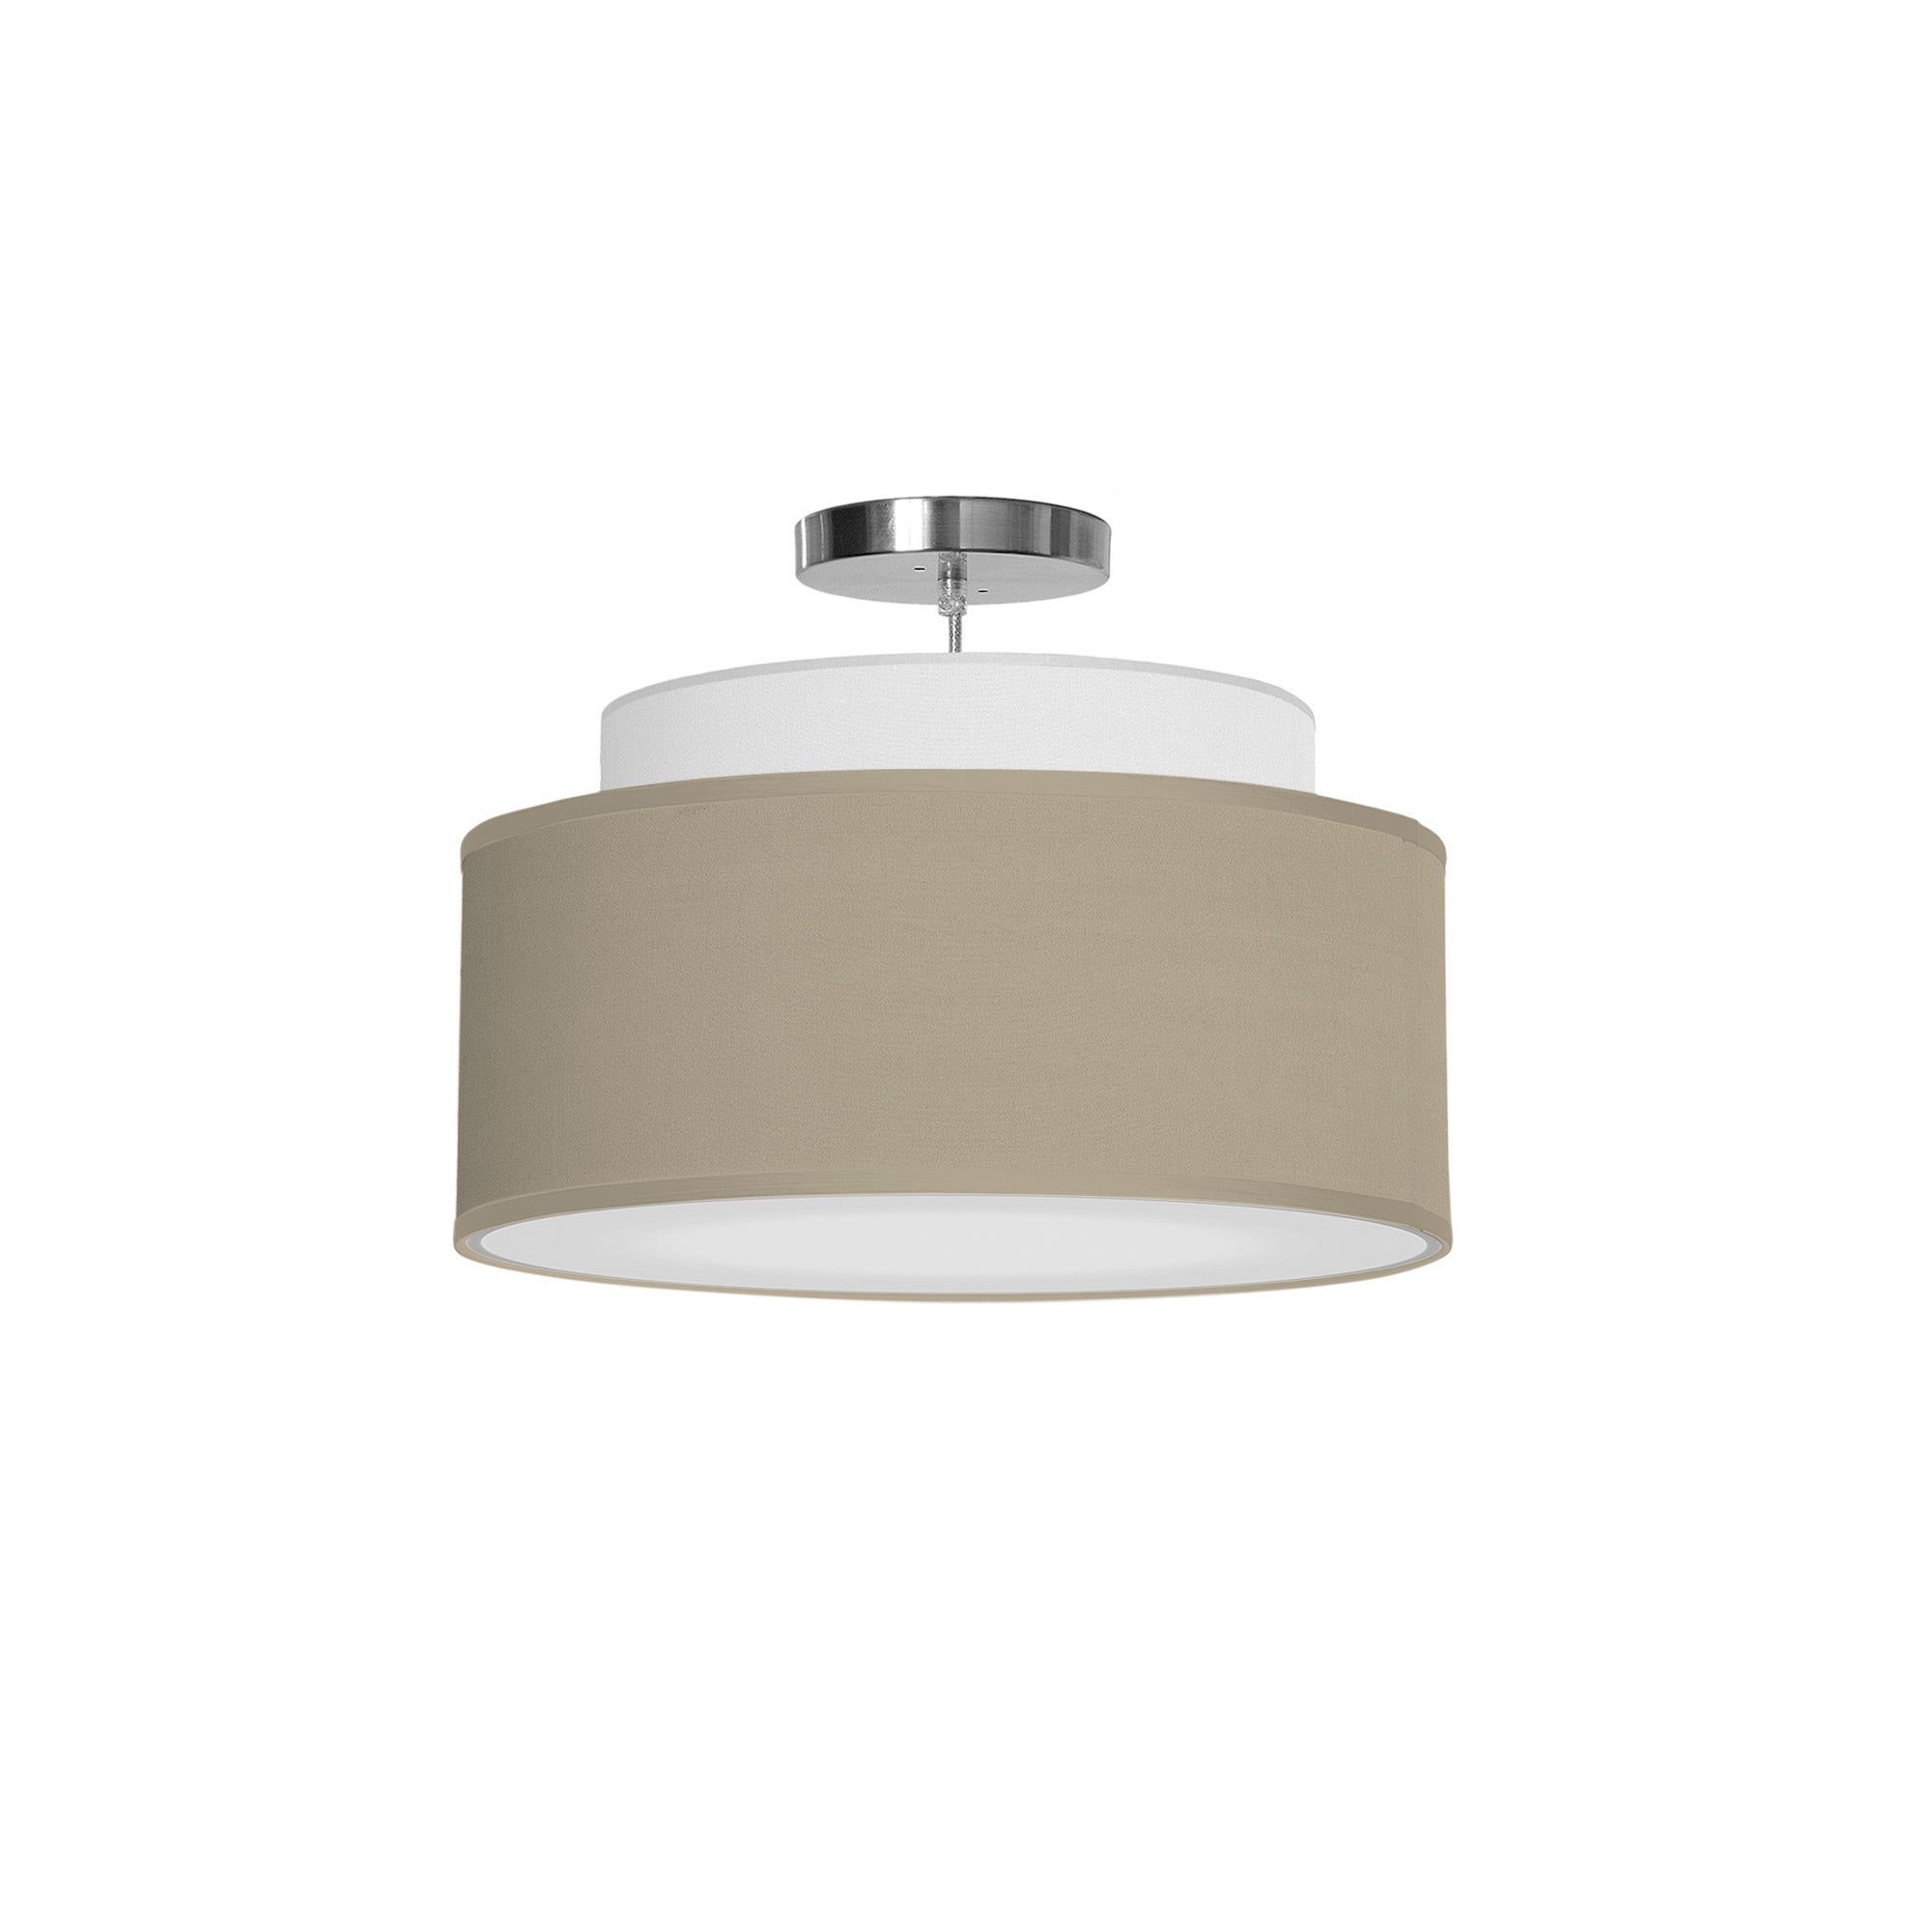 The Elsa Hanging Lamp from Seascape Fixtures with a linen shade in tan color.